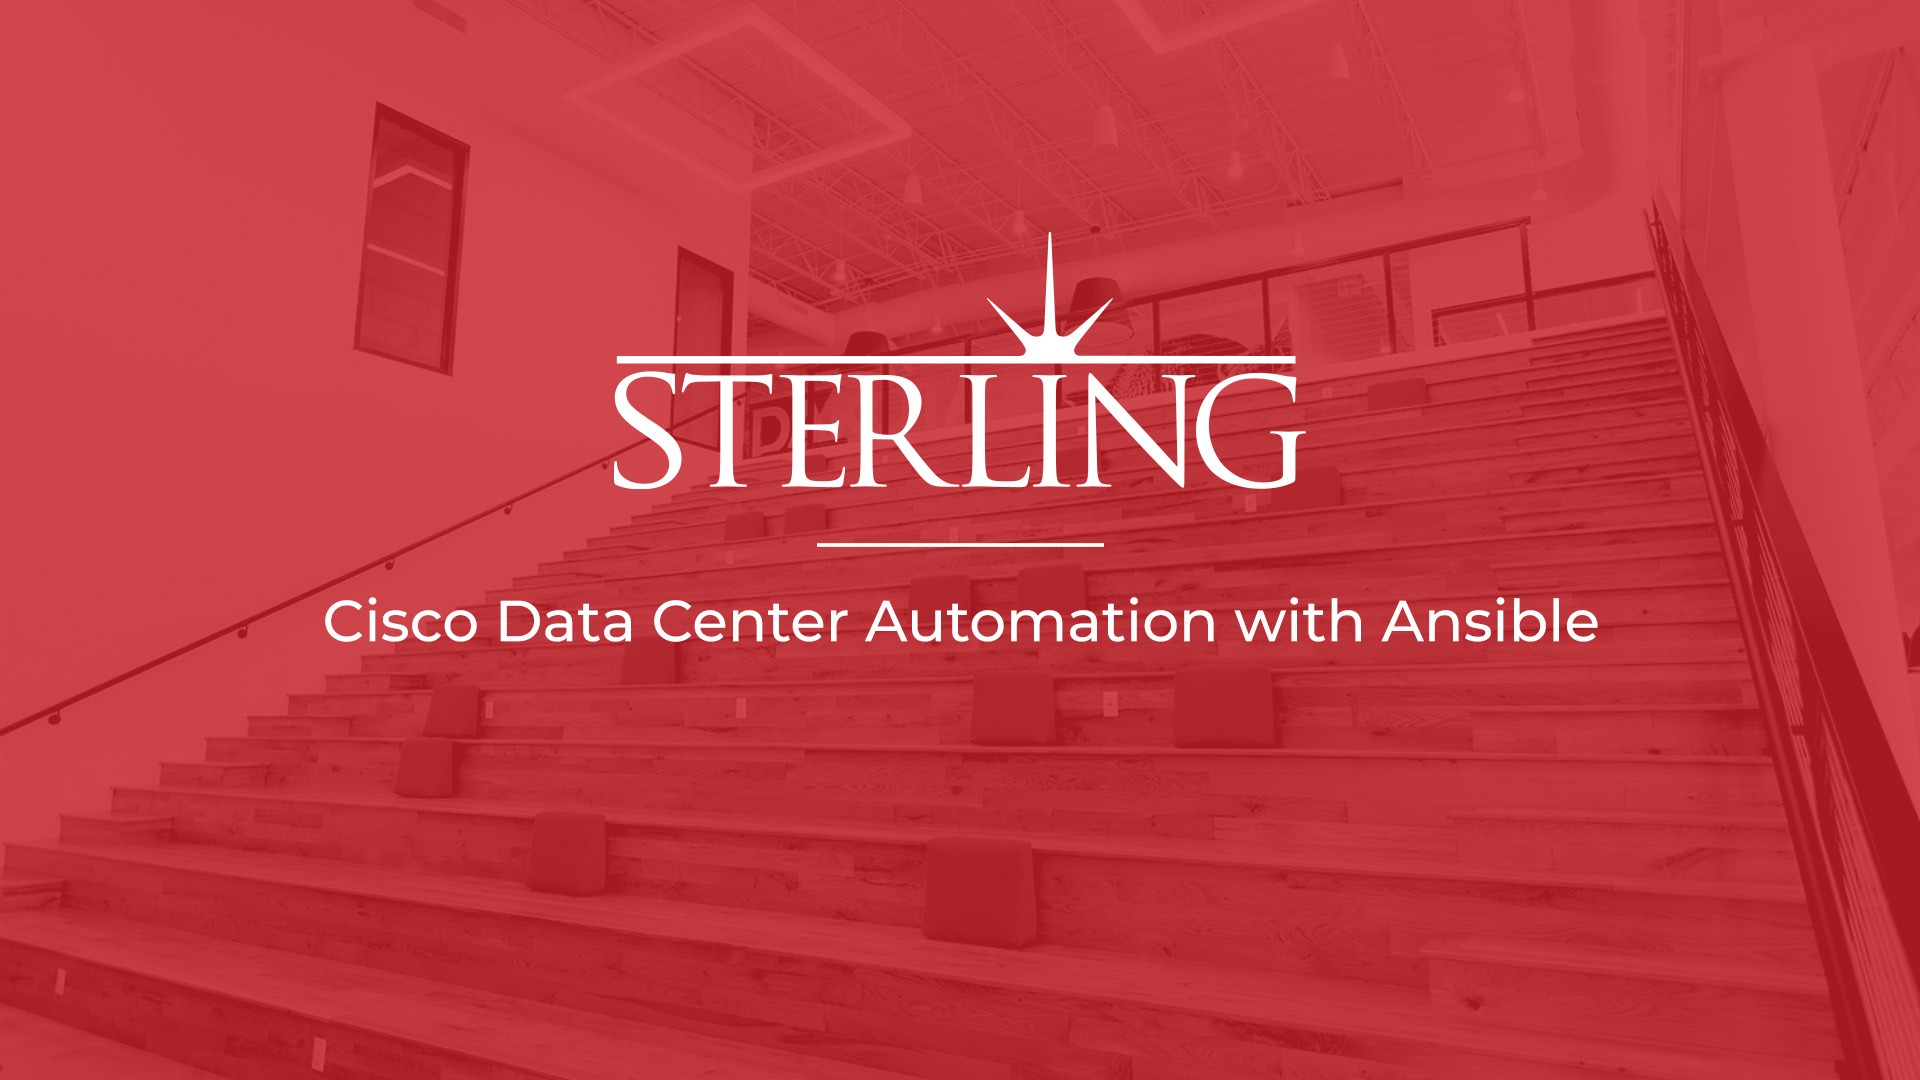 Cisco Data Center Automation with Ansible